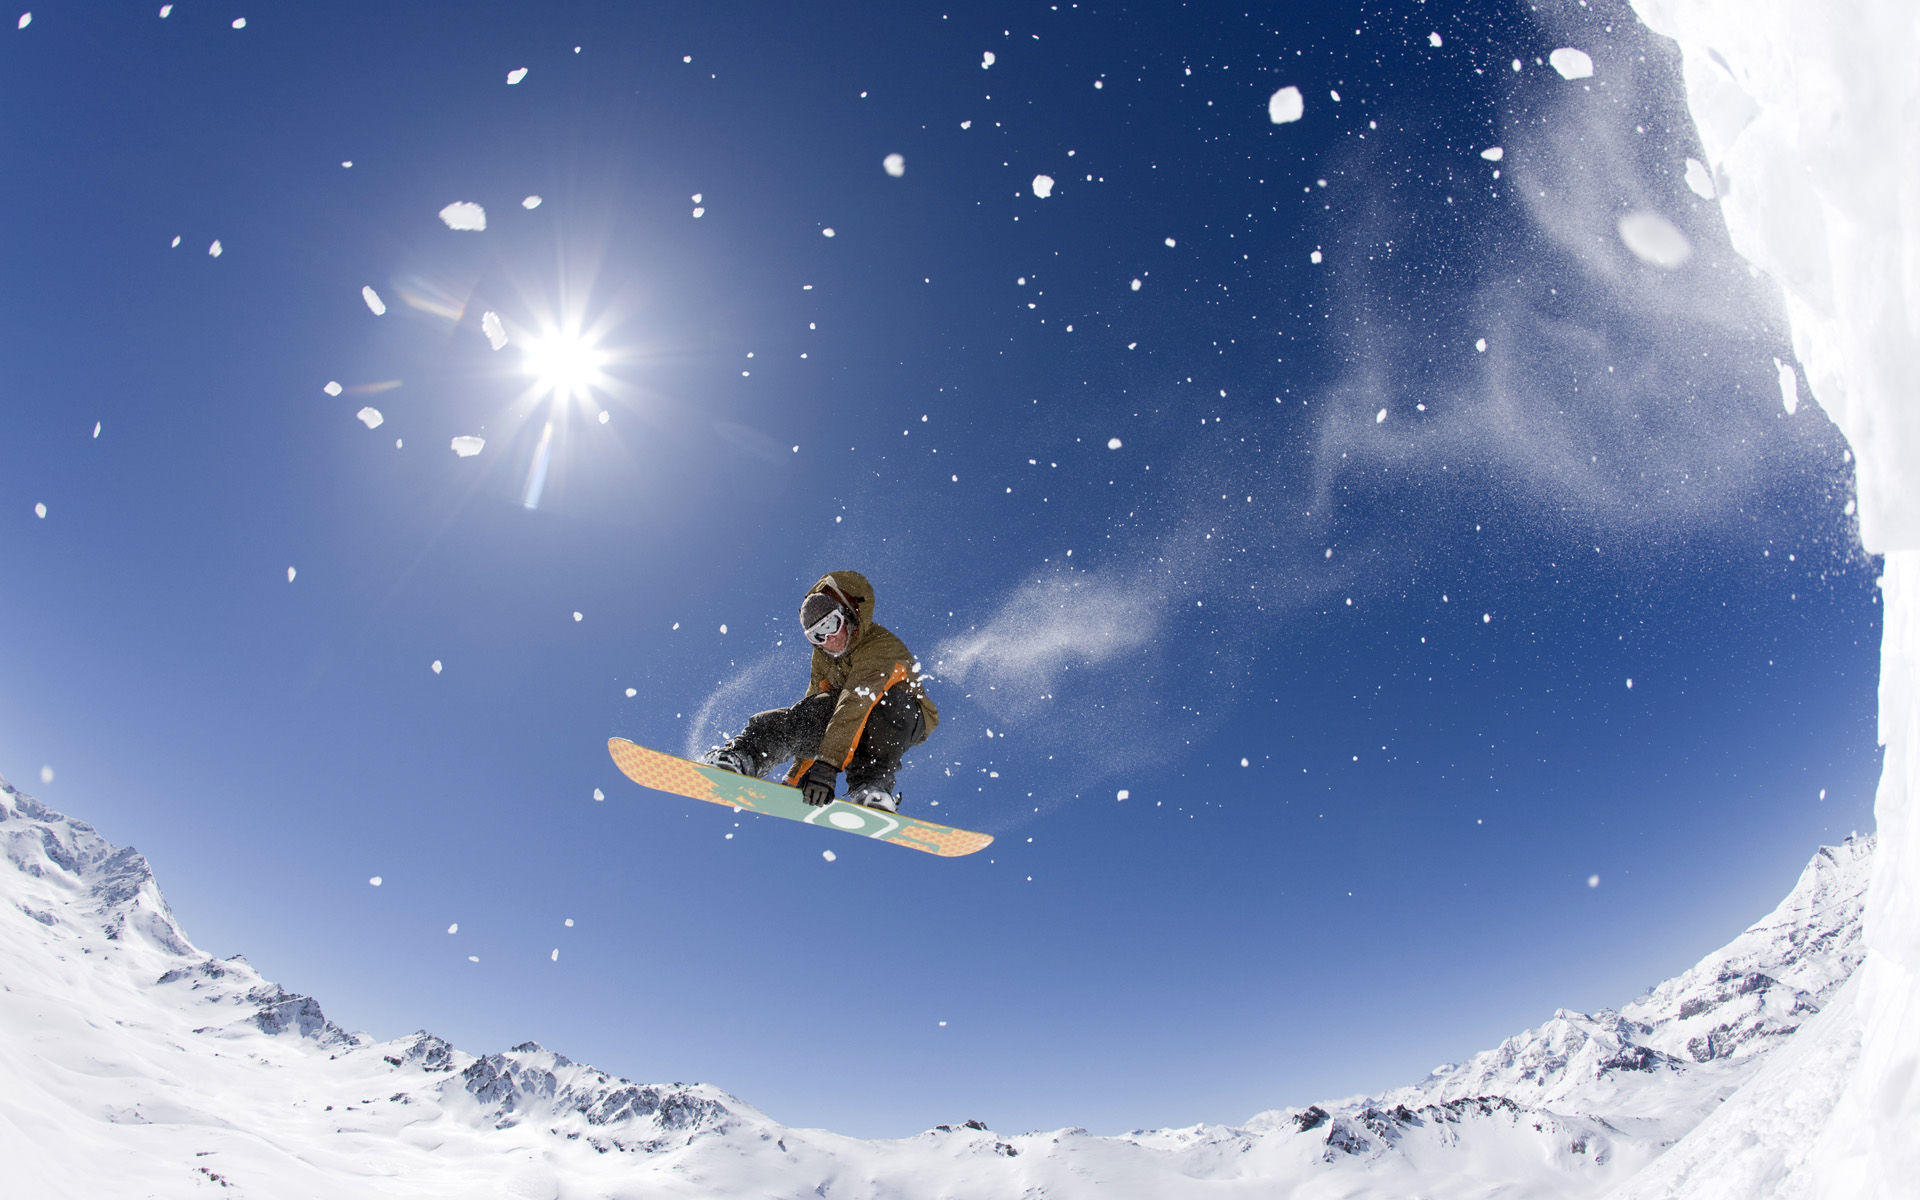 Winter Extreme Sports Wallpapers   HQ Wallpapers   HQ Wallpapers